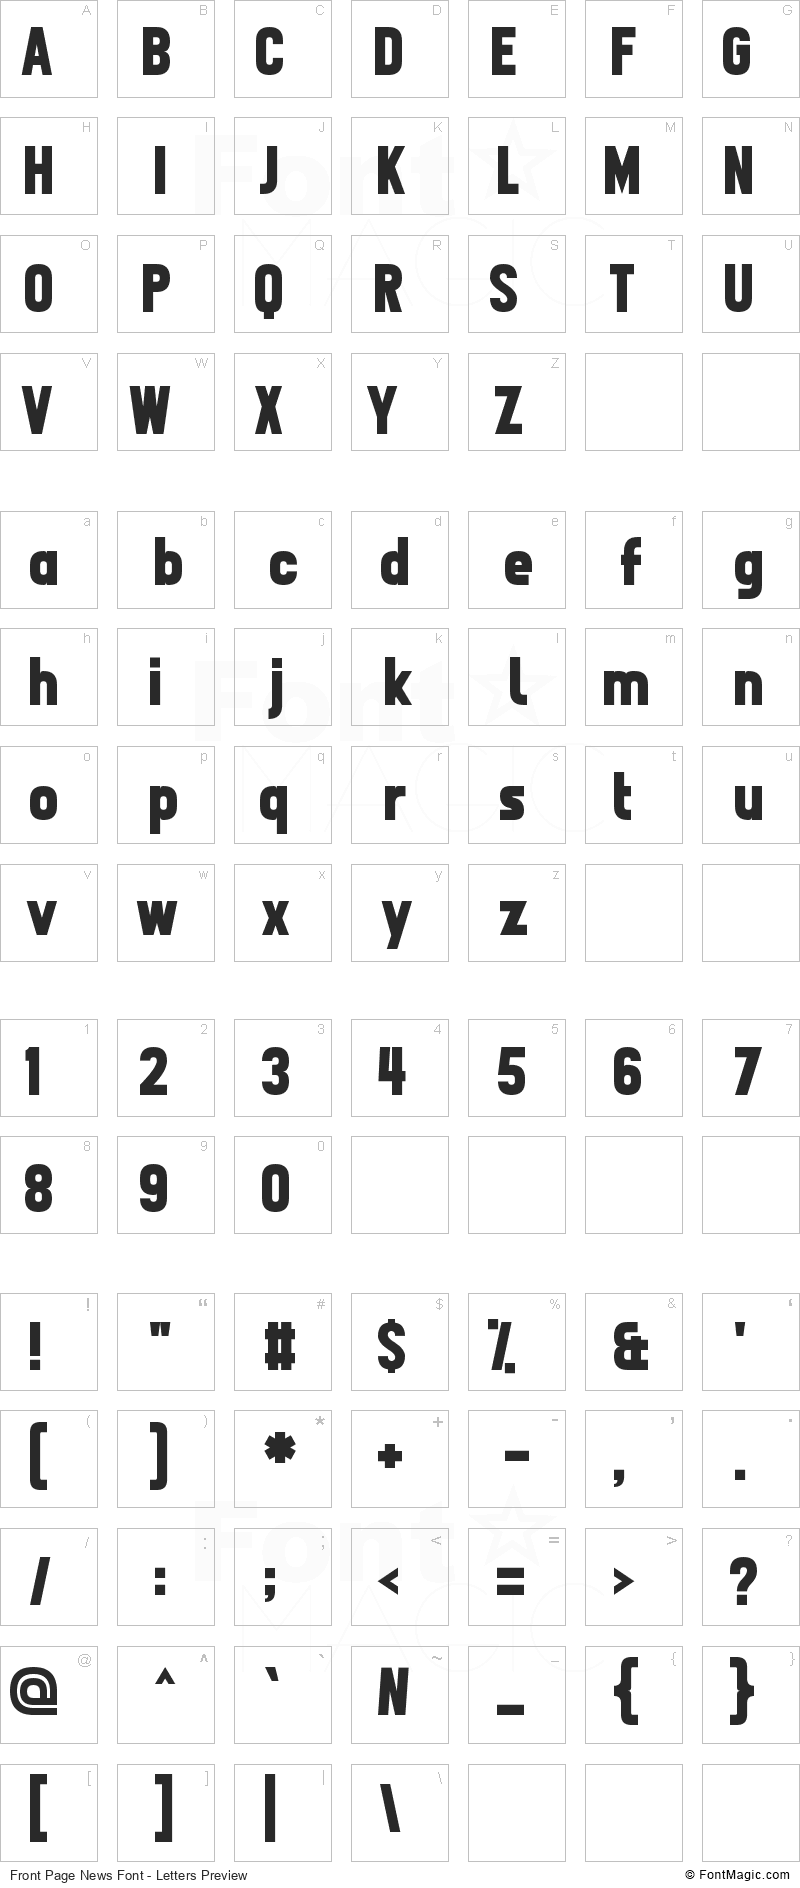 Front Page News Font - All Latters Preview Chart